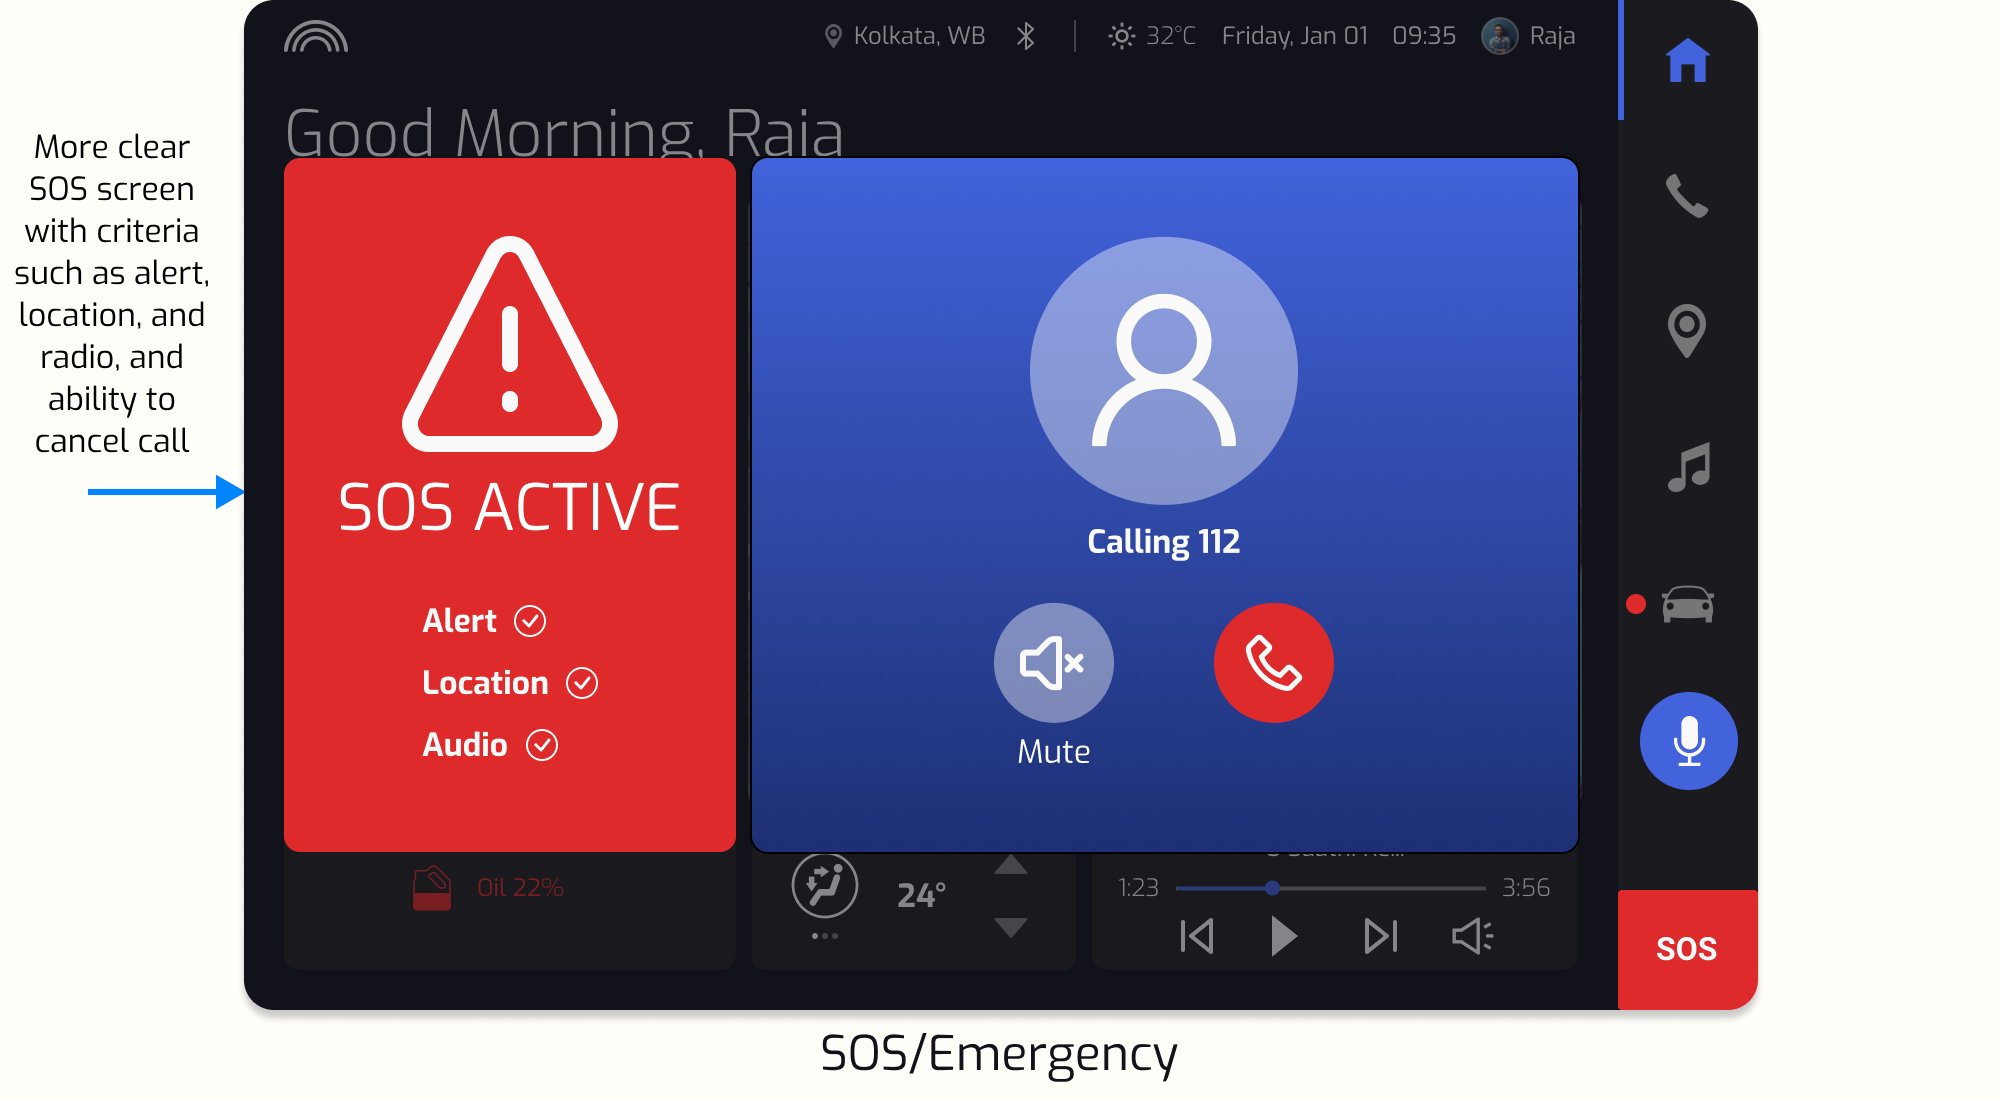 Saathi final SOS/emergency screen with annotations